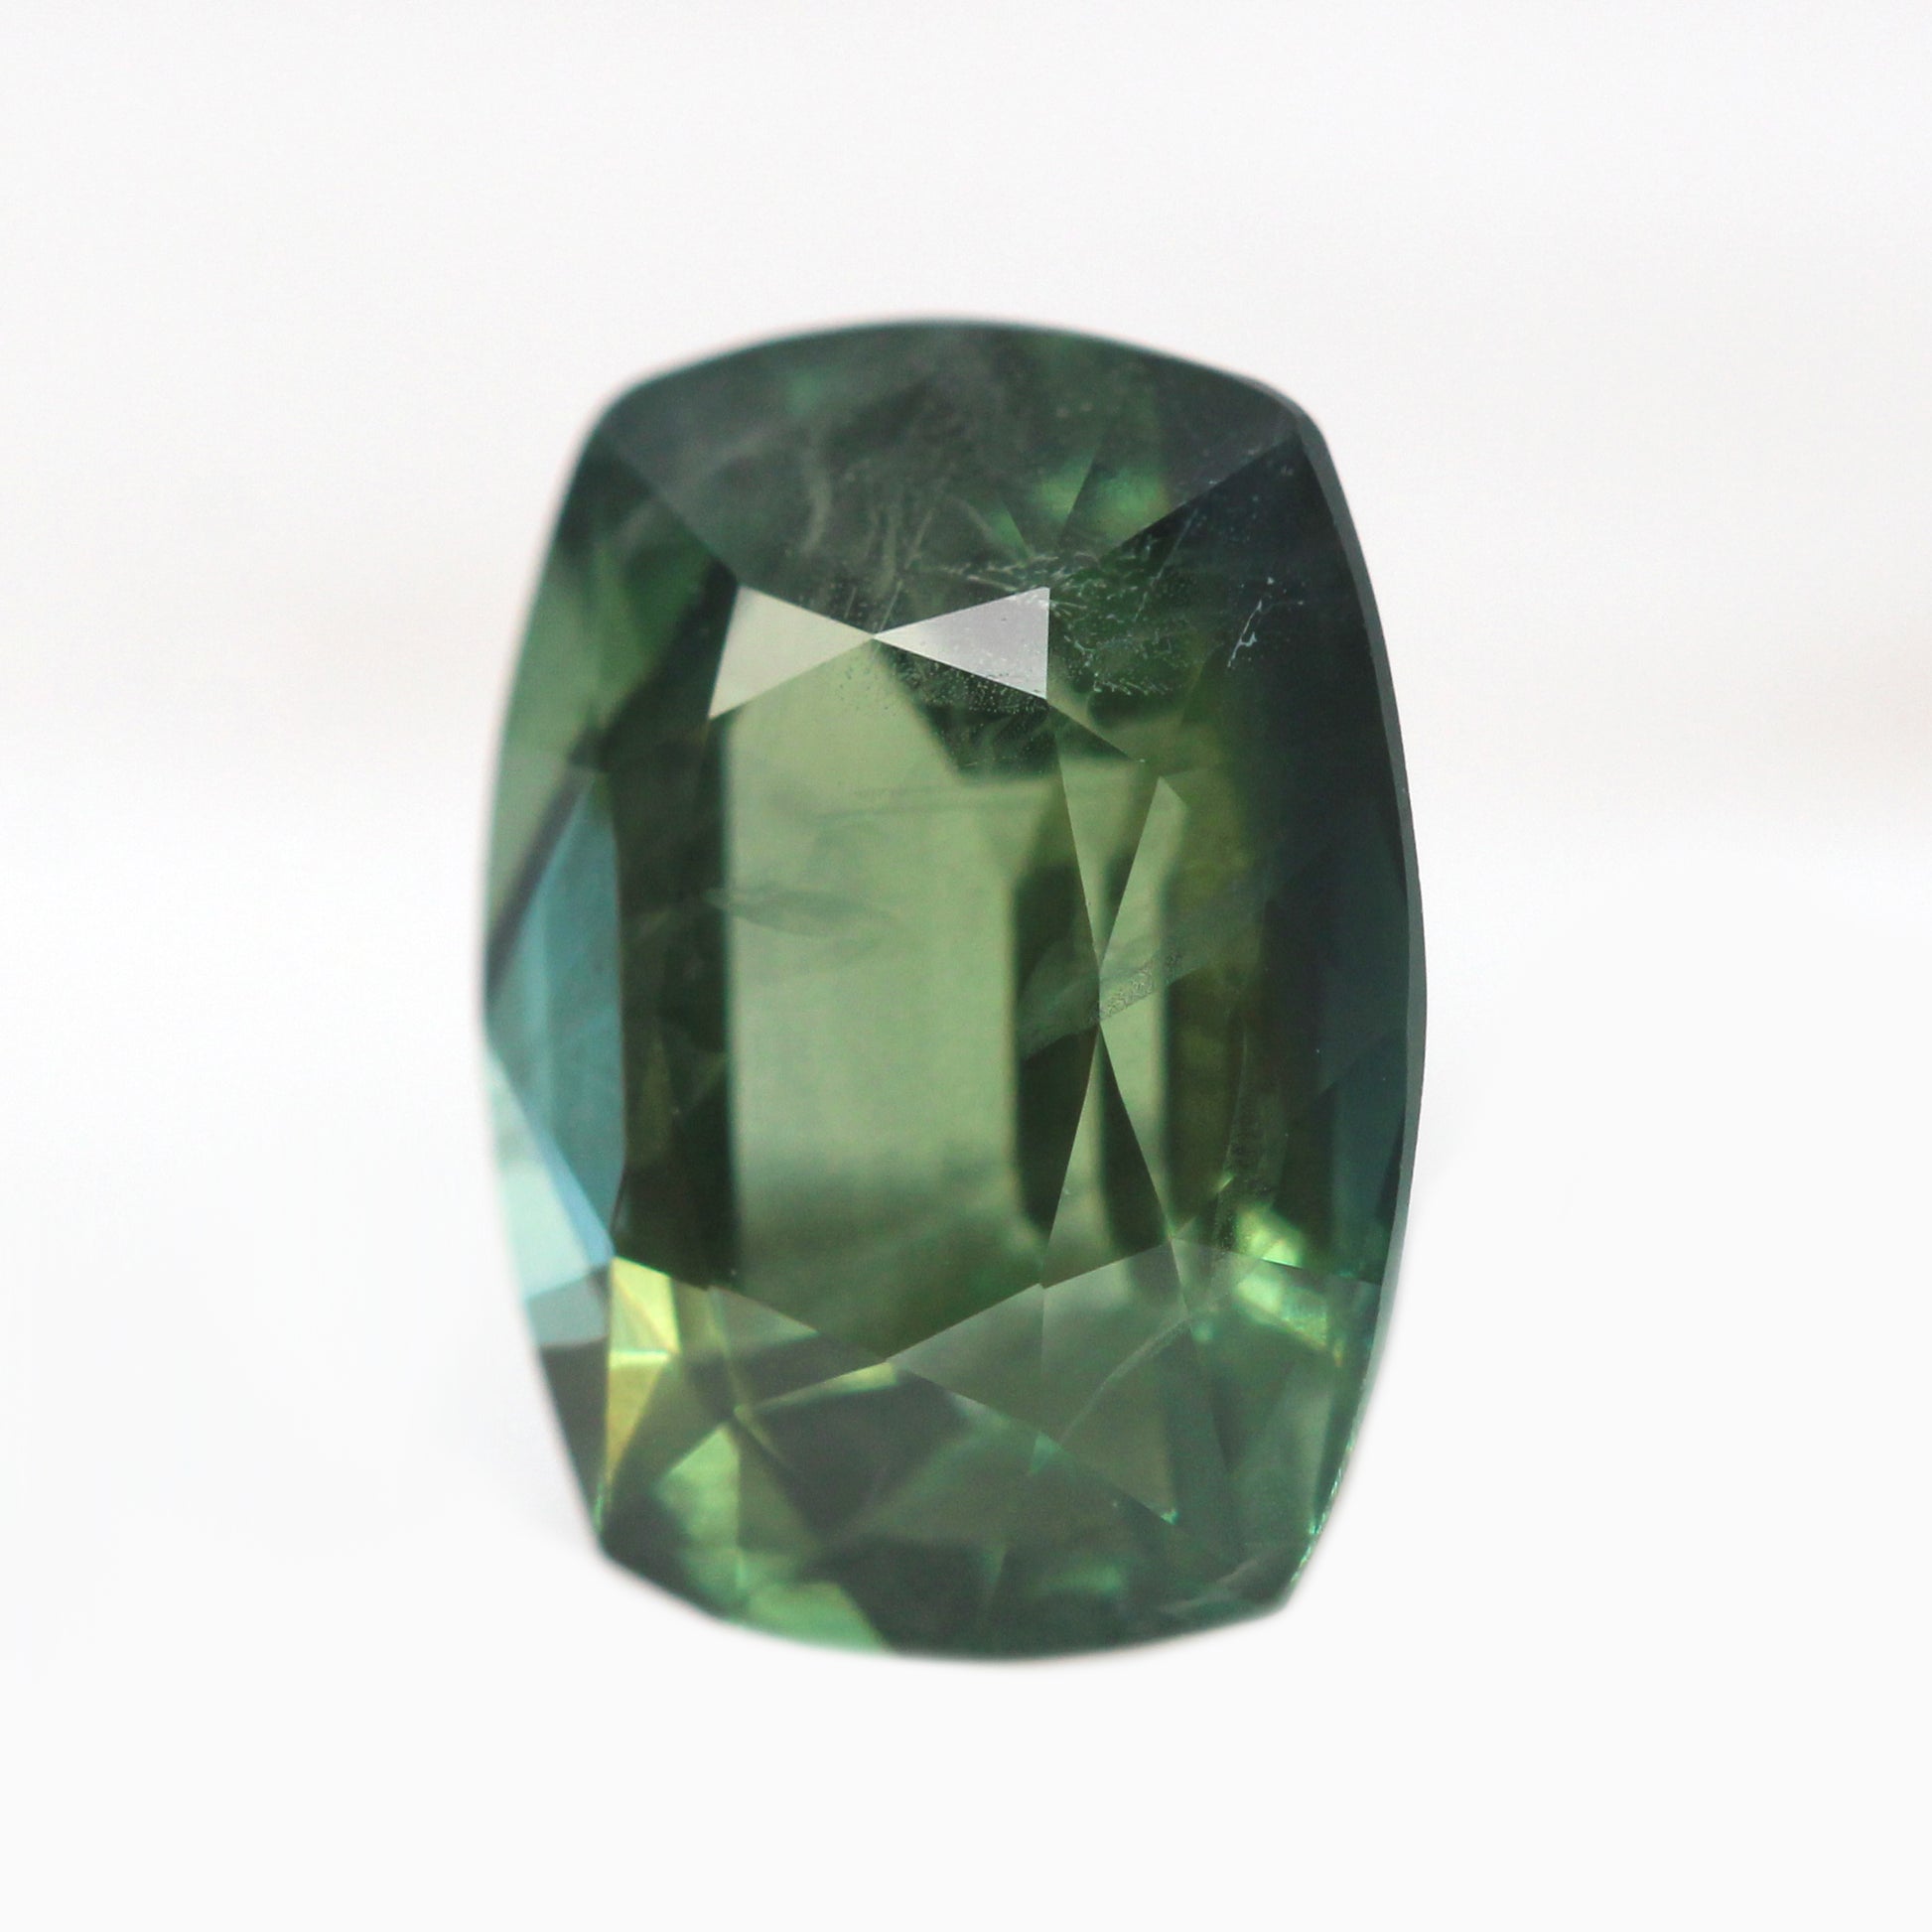 1.38 Carat Elongated Cushion Cut Teal Green Sapphire for Custom Work - Inventory Code TGCS138 - Midwinter Co. Alternative Bridal Rings and Modern Fine Jewelry